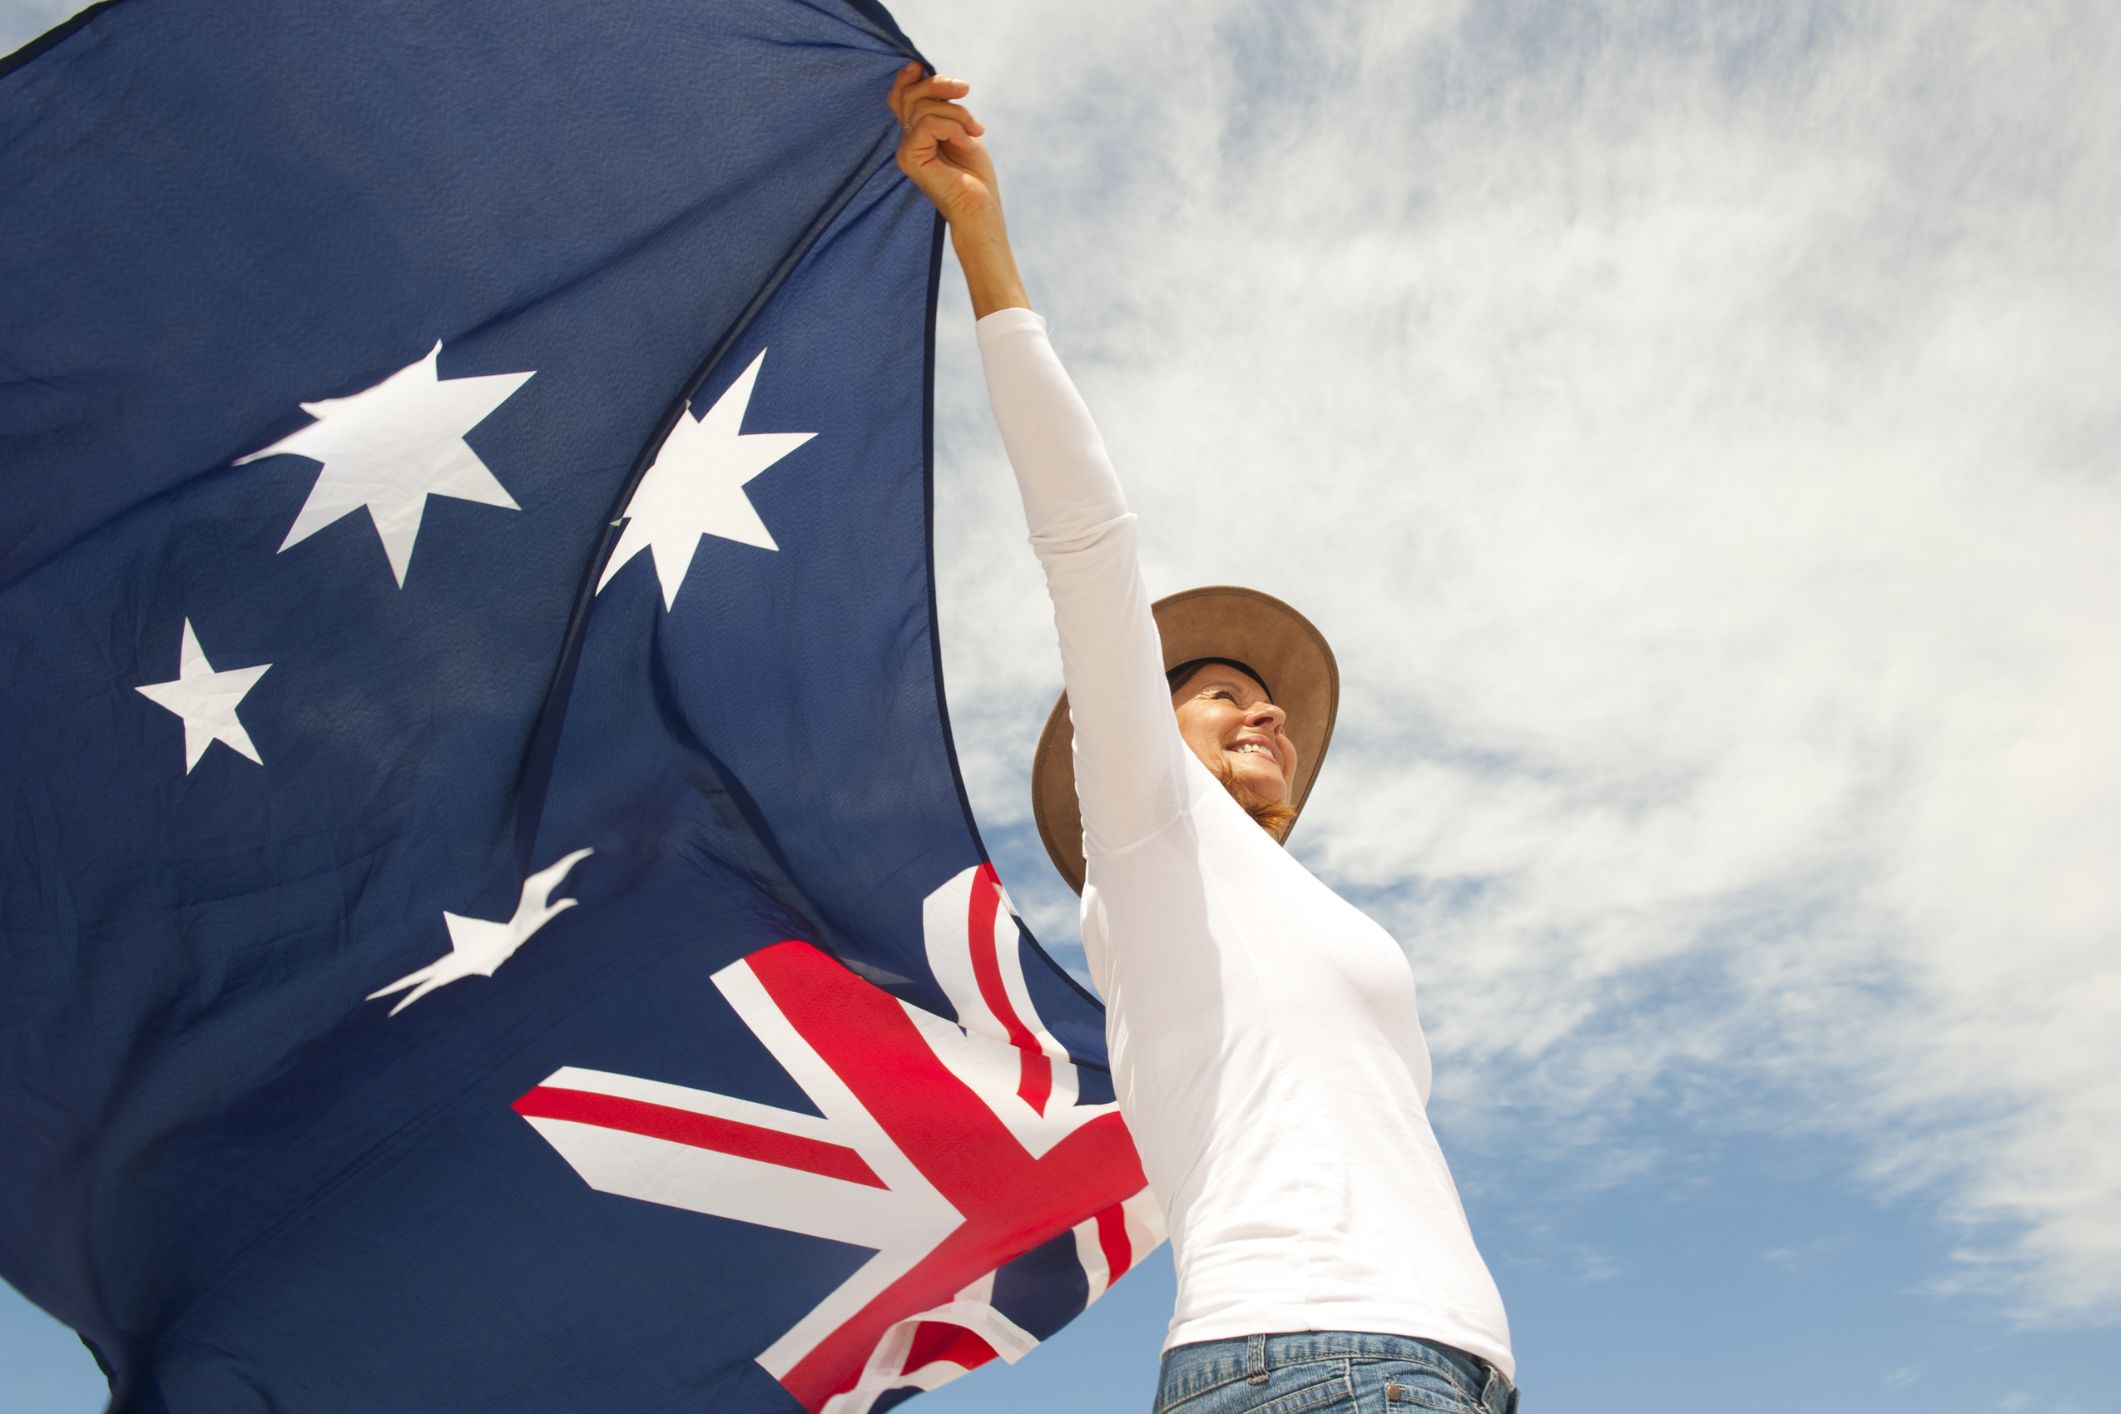 ‘Wide spectrum’: opinions divided over Australia Day